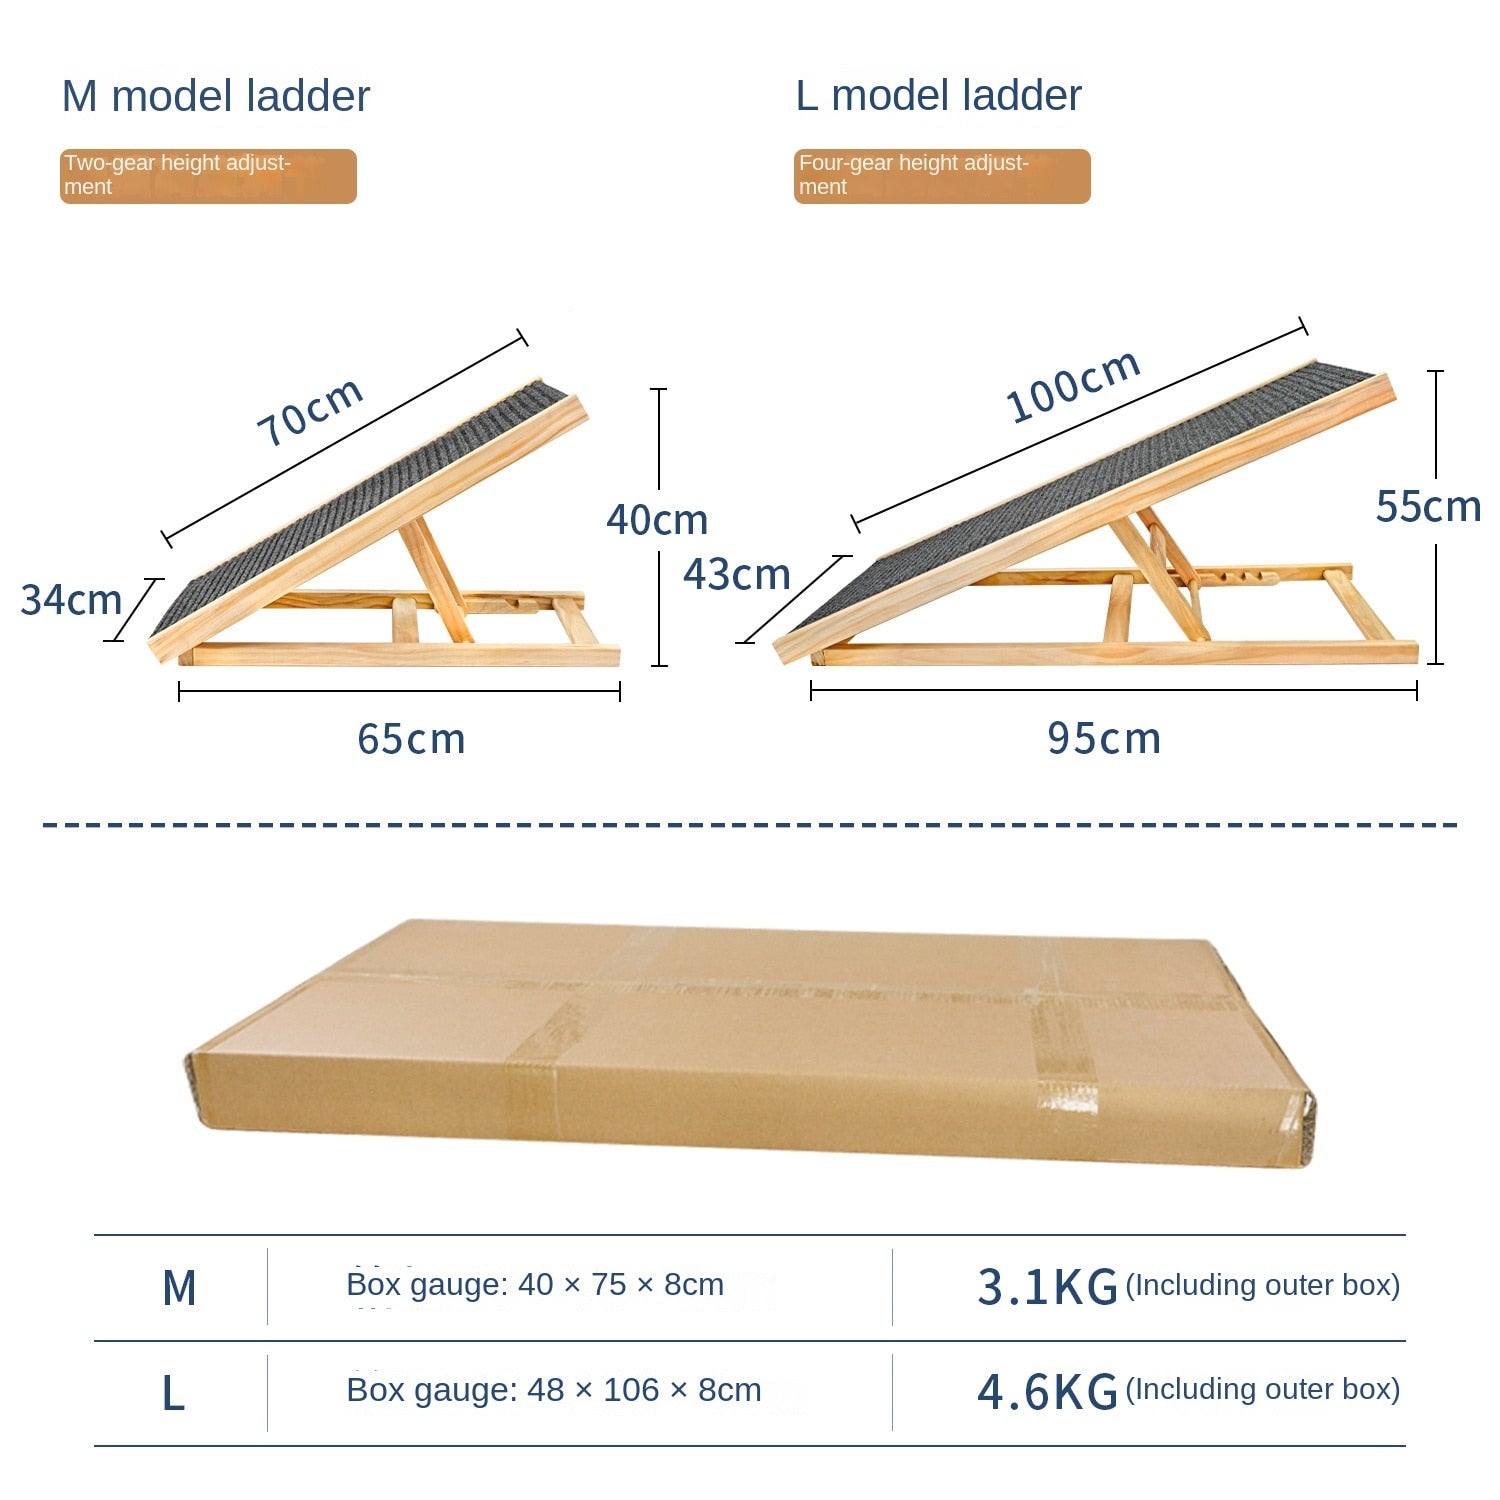 Specifications of our non-slip dog ramp: Dimensions, weight capacity, foldable design, textured surface for traction.